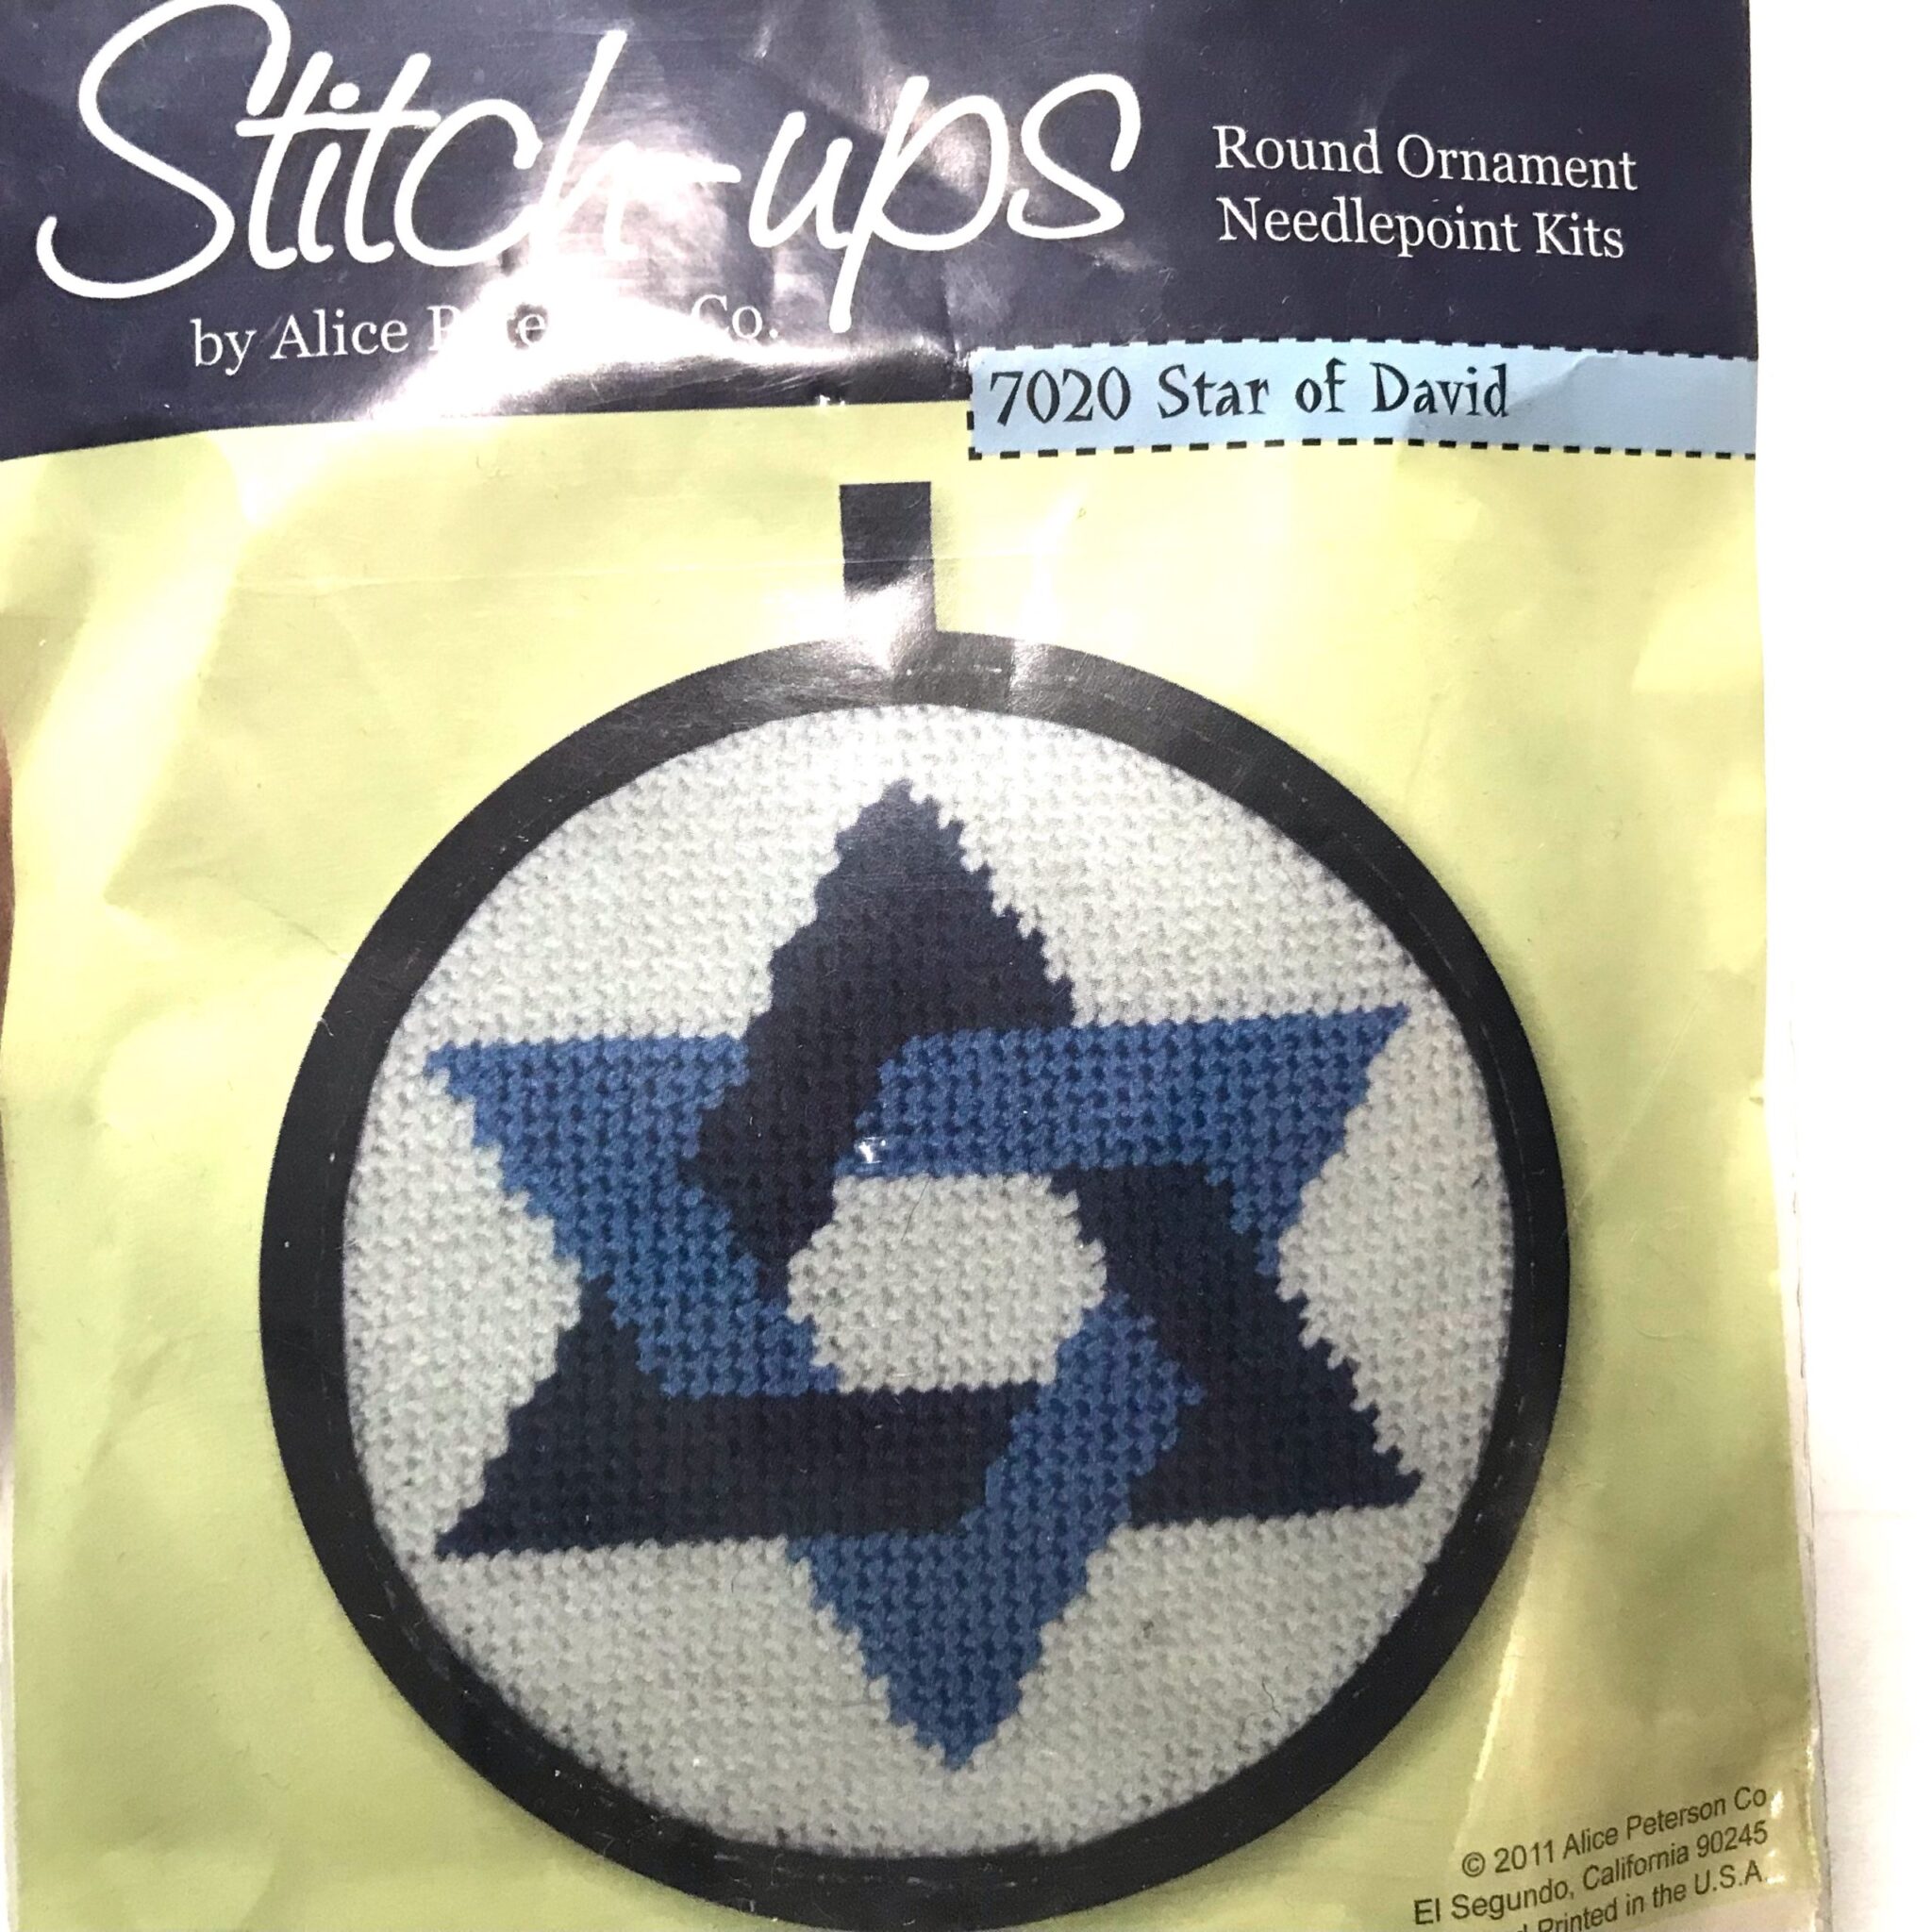 Stitch & Zip Round Ornament Needlepoint Kit by Alice Peterson Co.